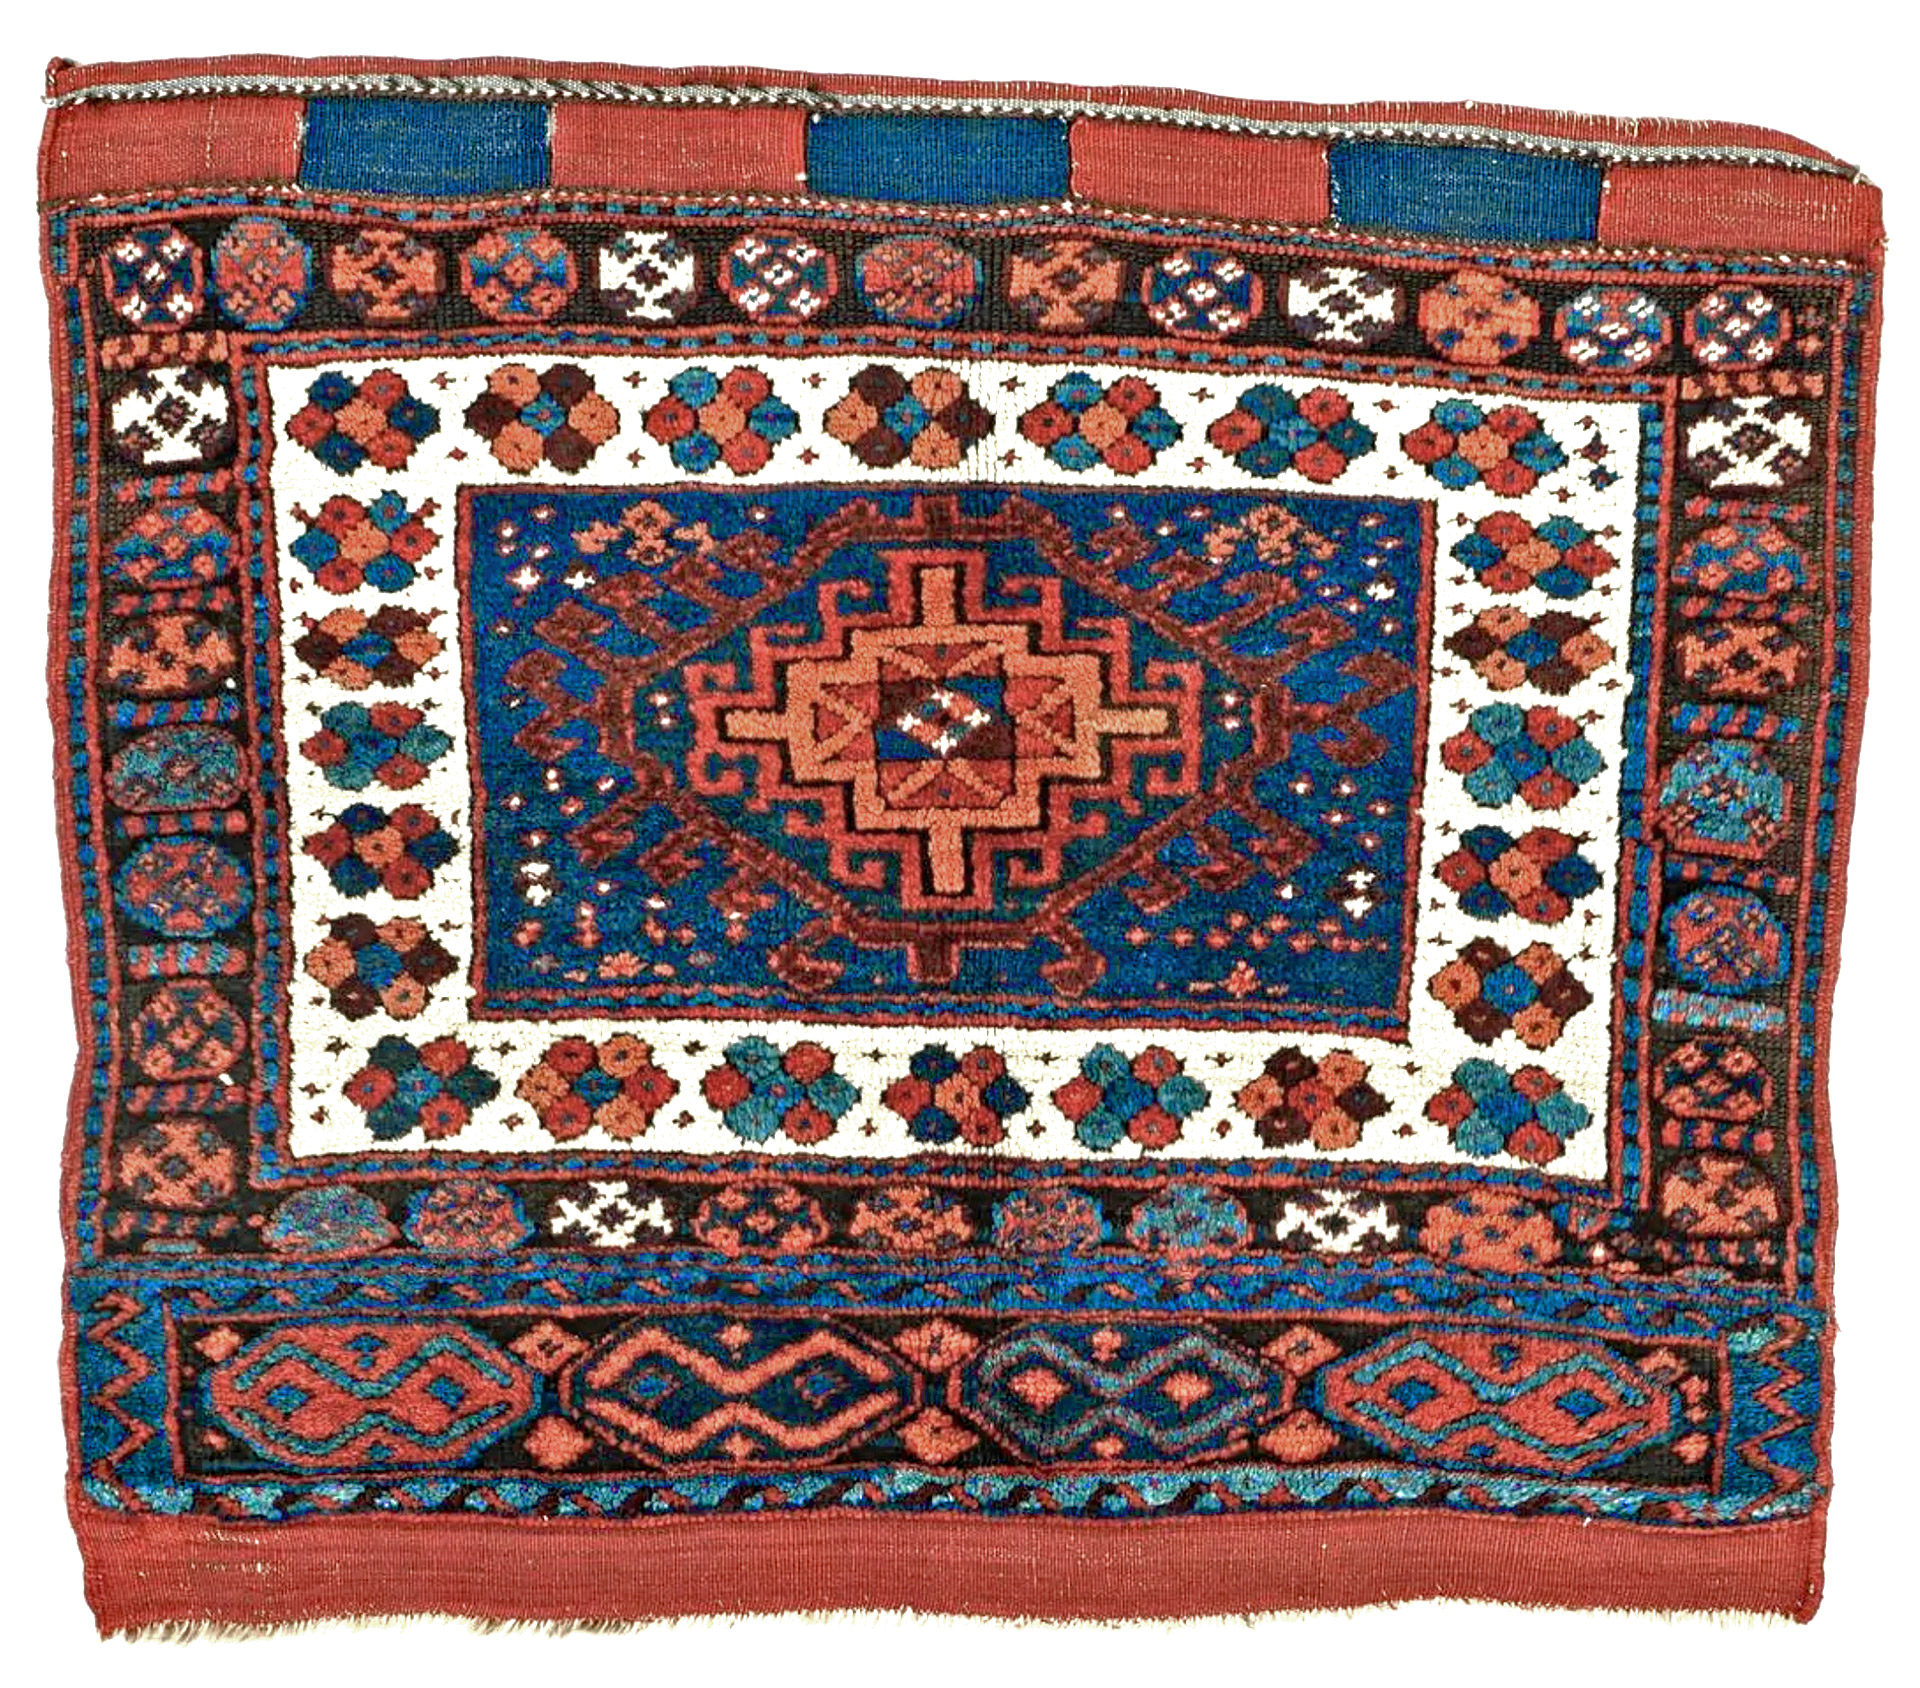 A large antique Kurdish bag face, probably woven in northwest Persia, circa 1900